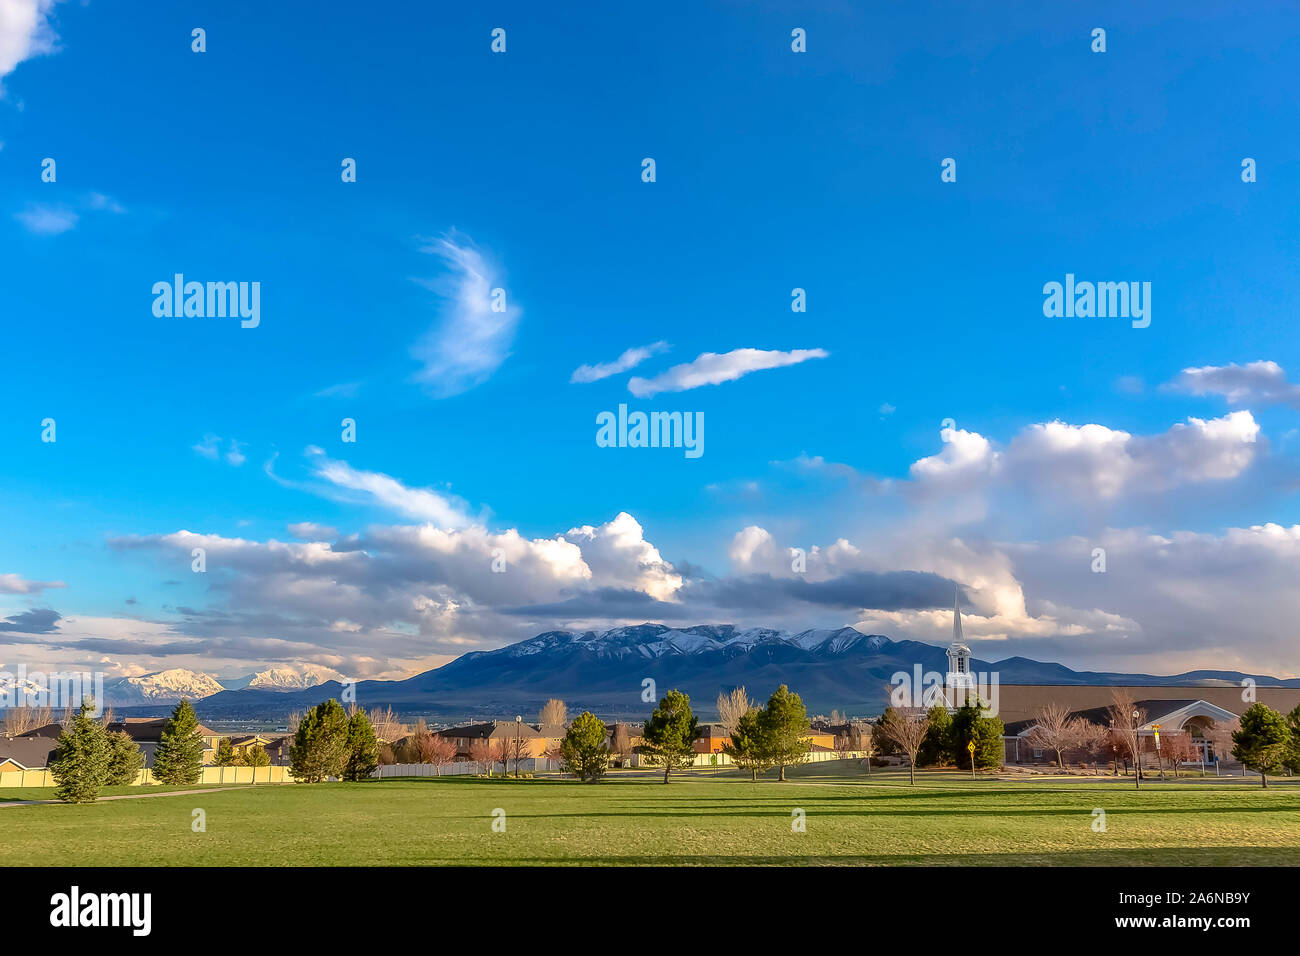 Green countryside landscape with blue sky and clouds Stock Photo